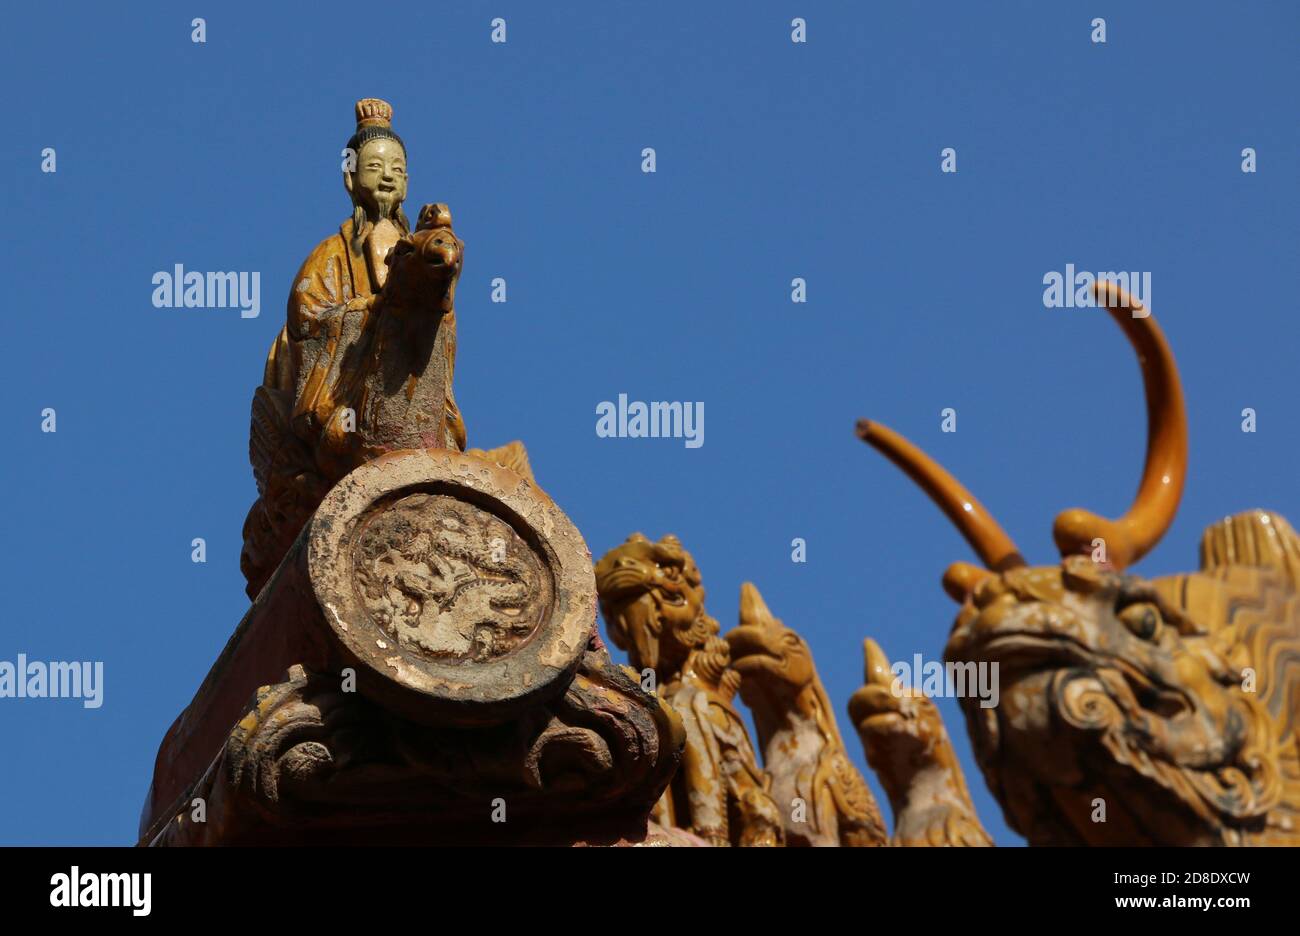 Yellow glazed procession of figures on gable of building at Forbidden Palace, Beijing Stock Photo